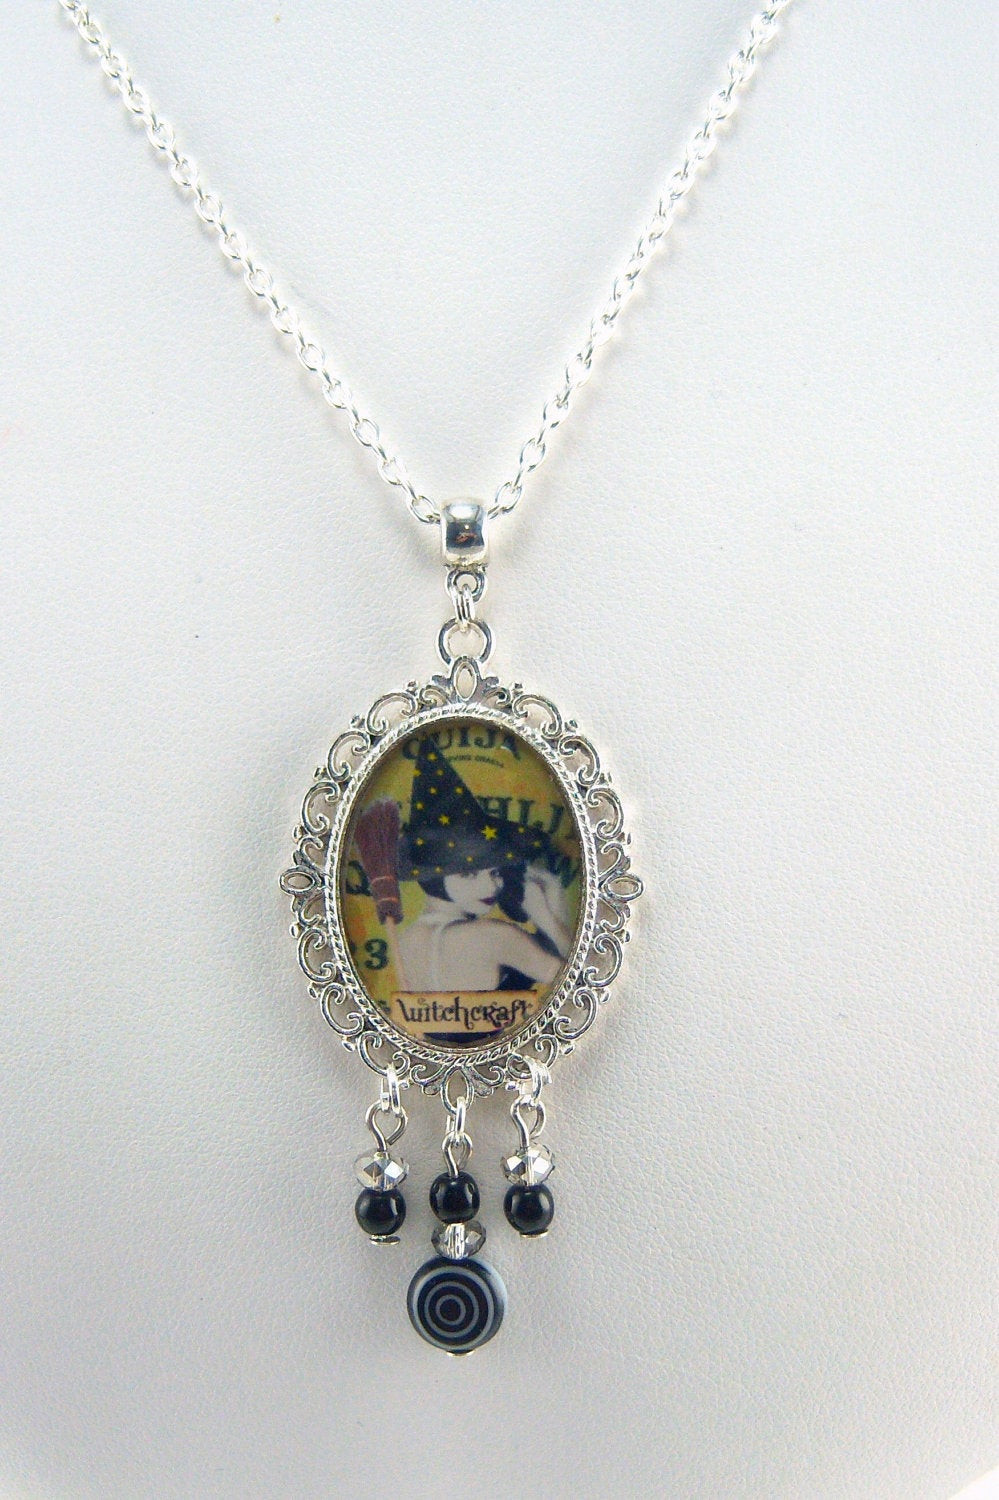 Necklaces With Charms
 Witchcraft Witchcraft Jewelry